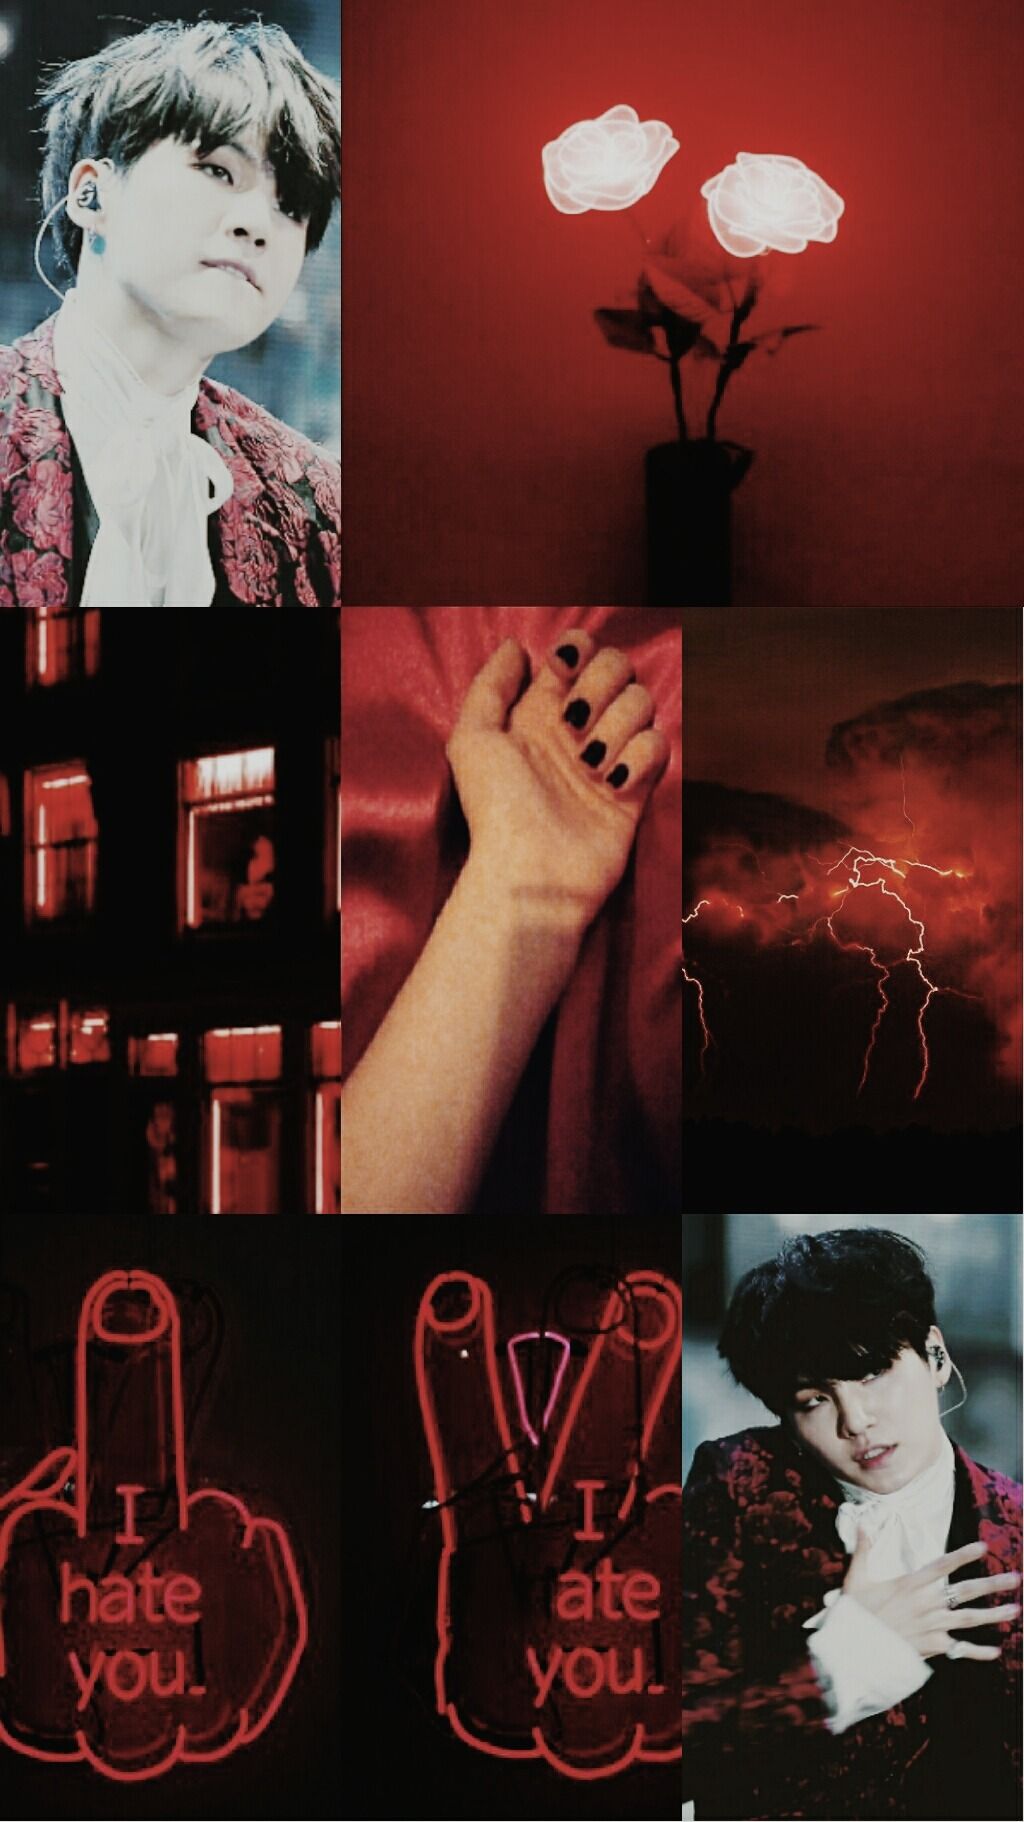 Aesthetic background for mobile phone with images of the boyz - Suga, BTS